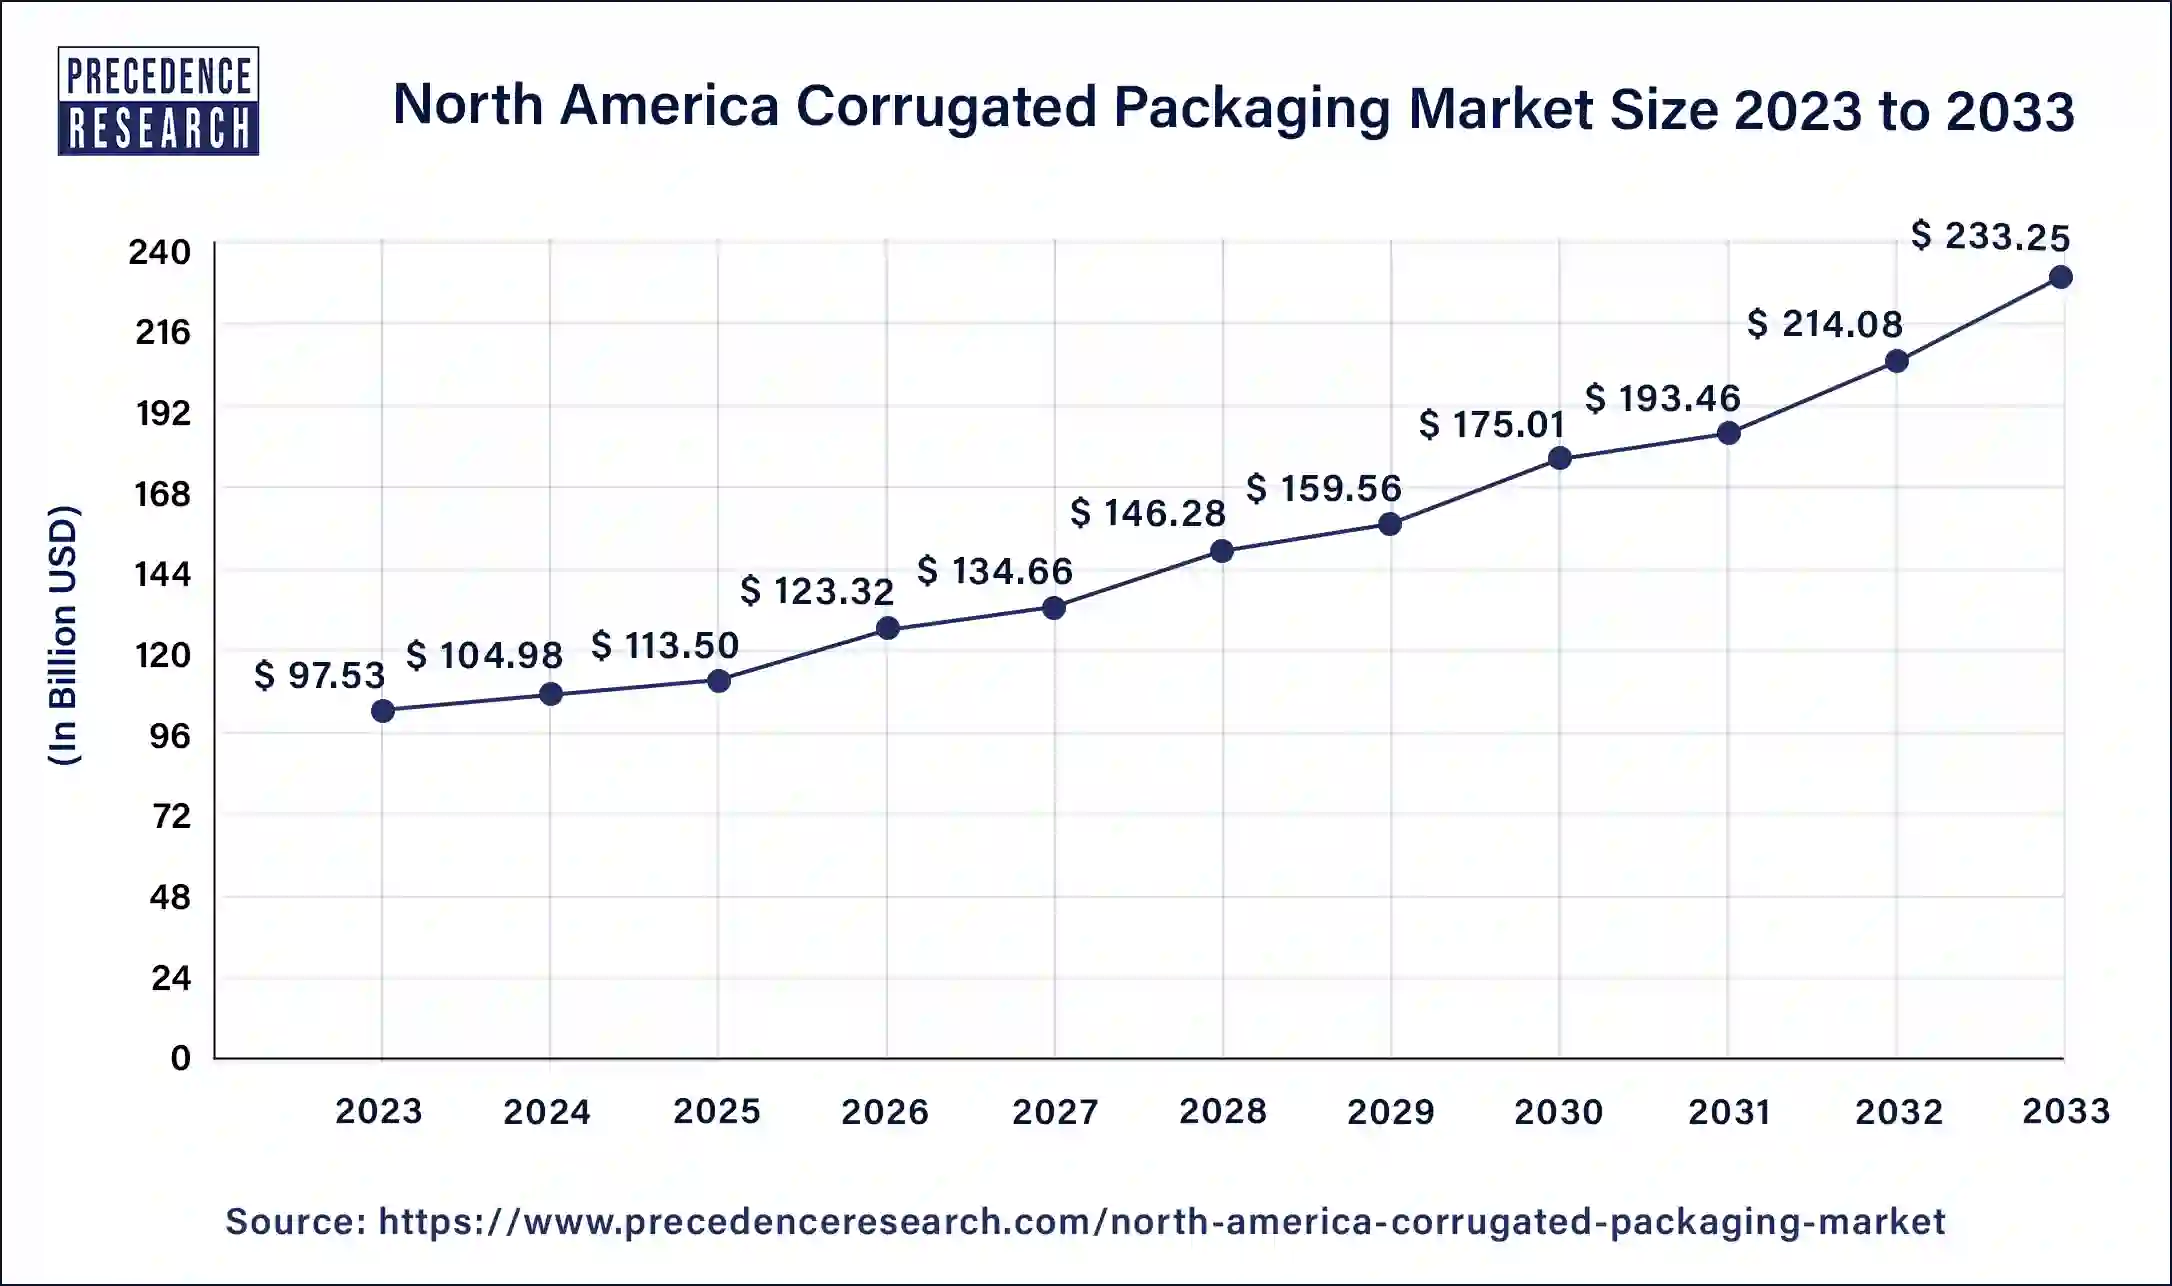 North America Corrugated Packaging Market Size 2024 to 2033